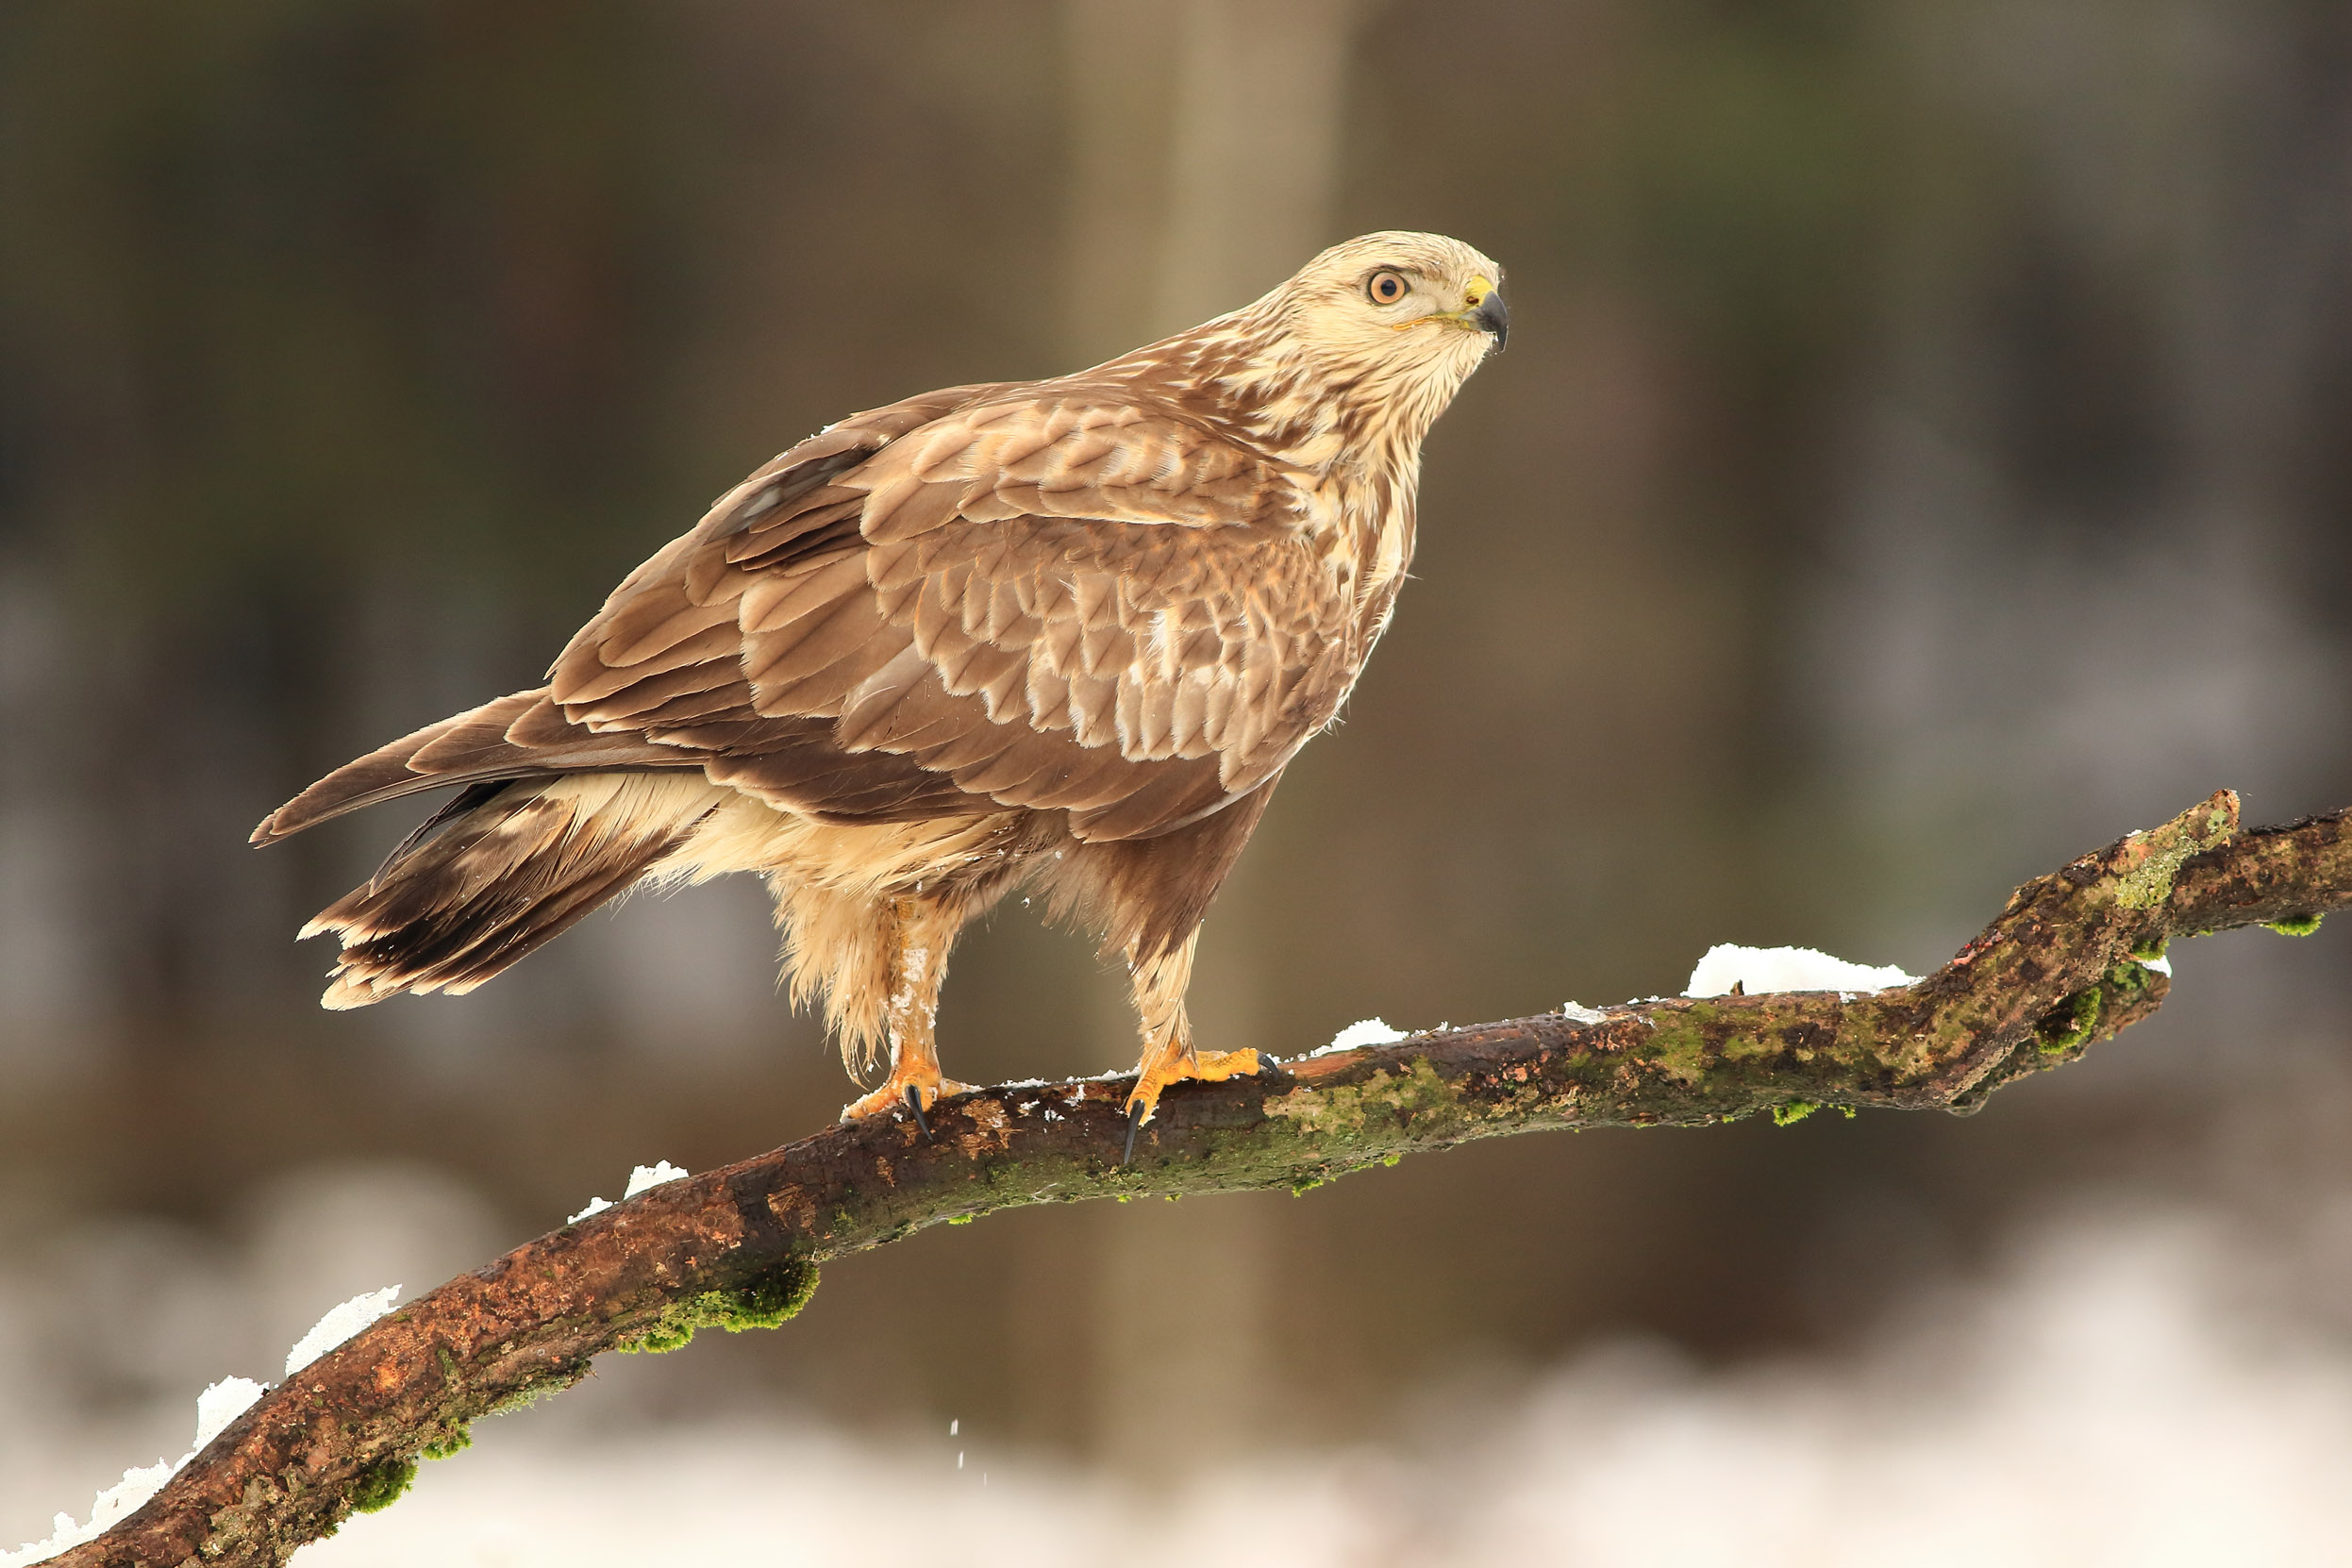 A Rough-legged Buzzard perched on a branch, surrounded by snow.